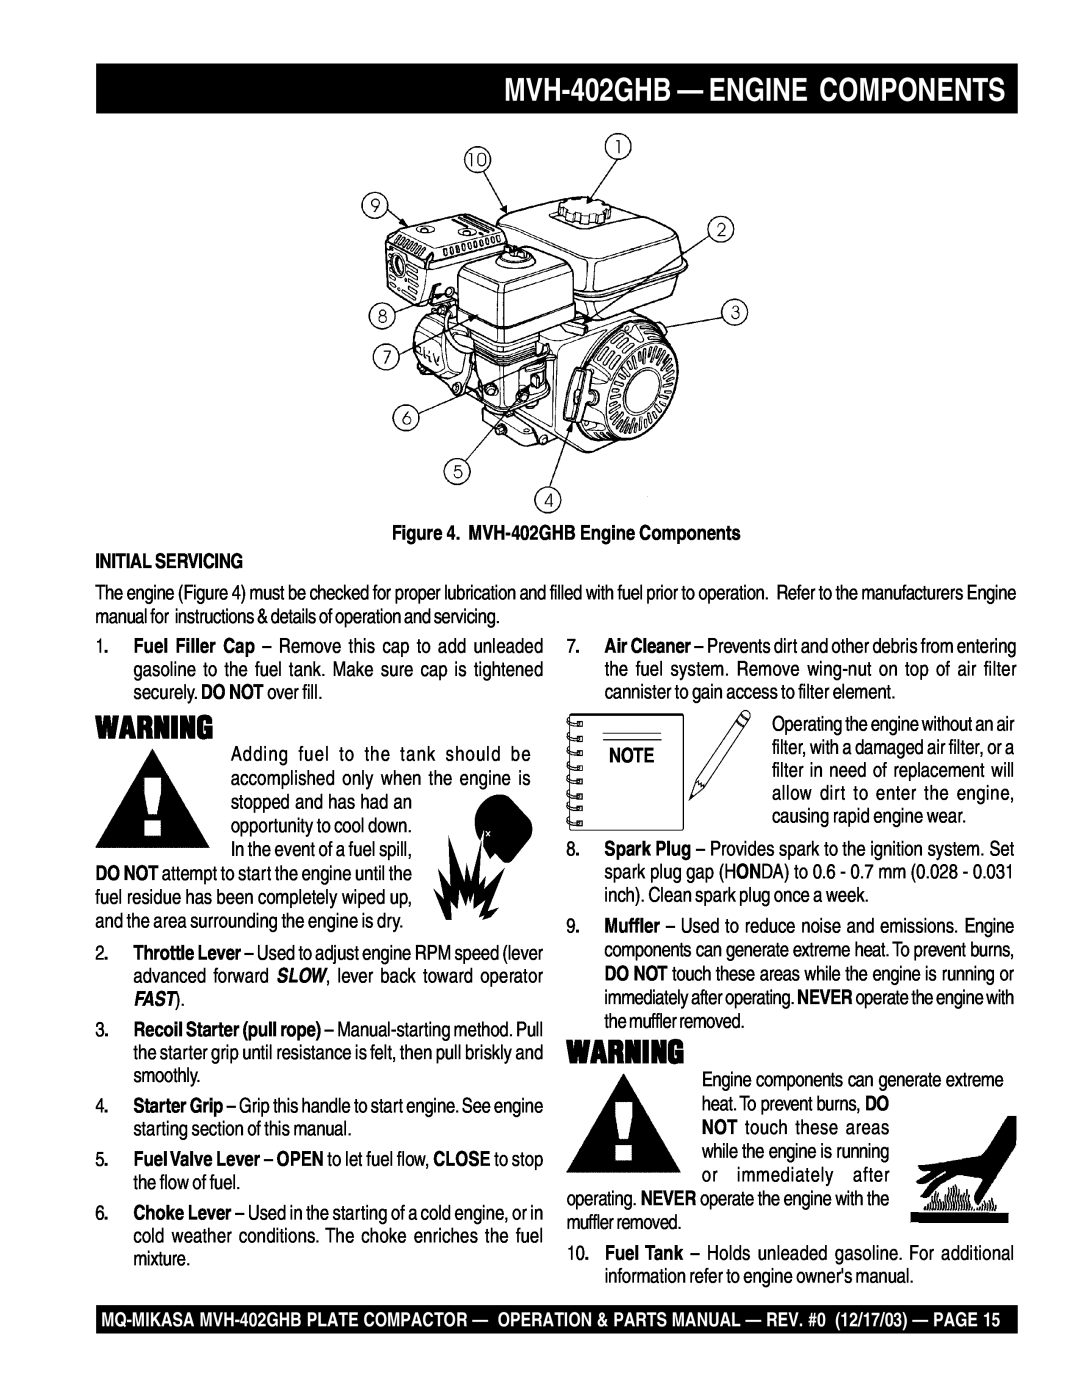 Multiquip manual MVH-402GHB- ENGINE COMPONENTS, MVH-402GHBEngine Components, Initial Servicing, Fast 